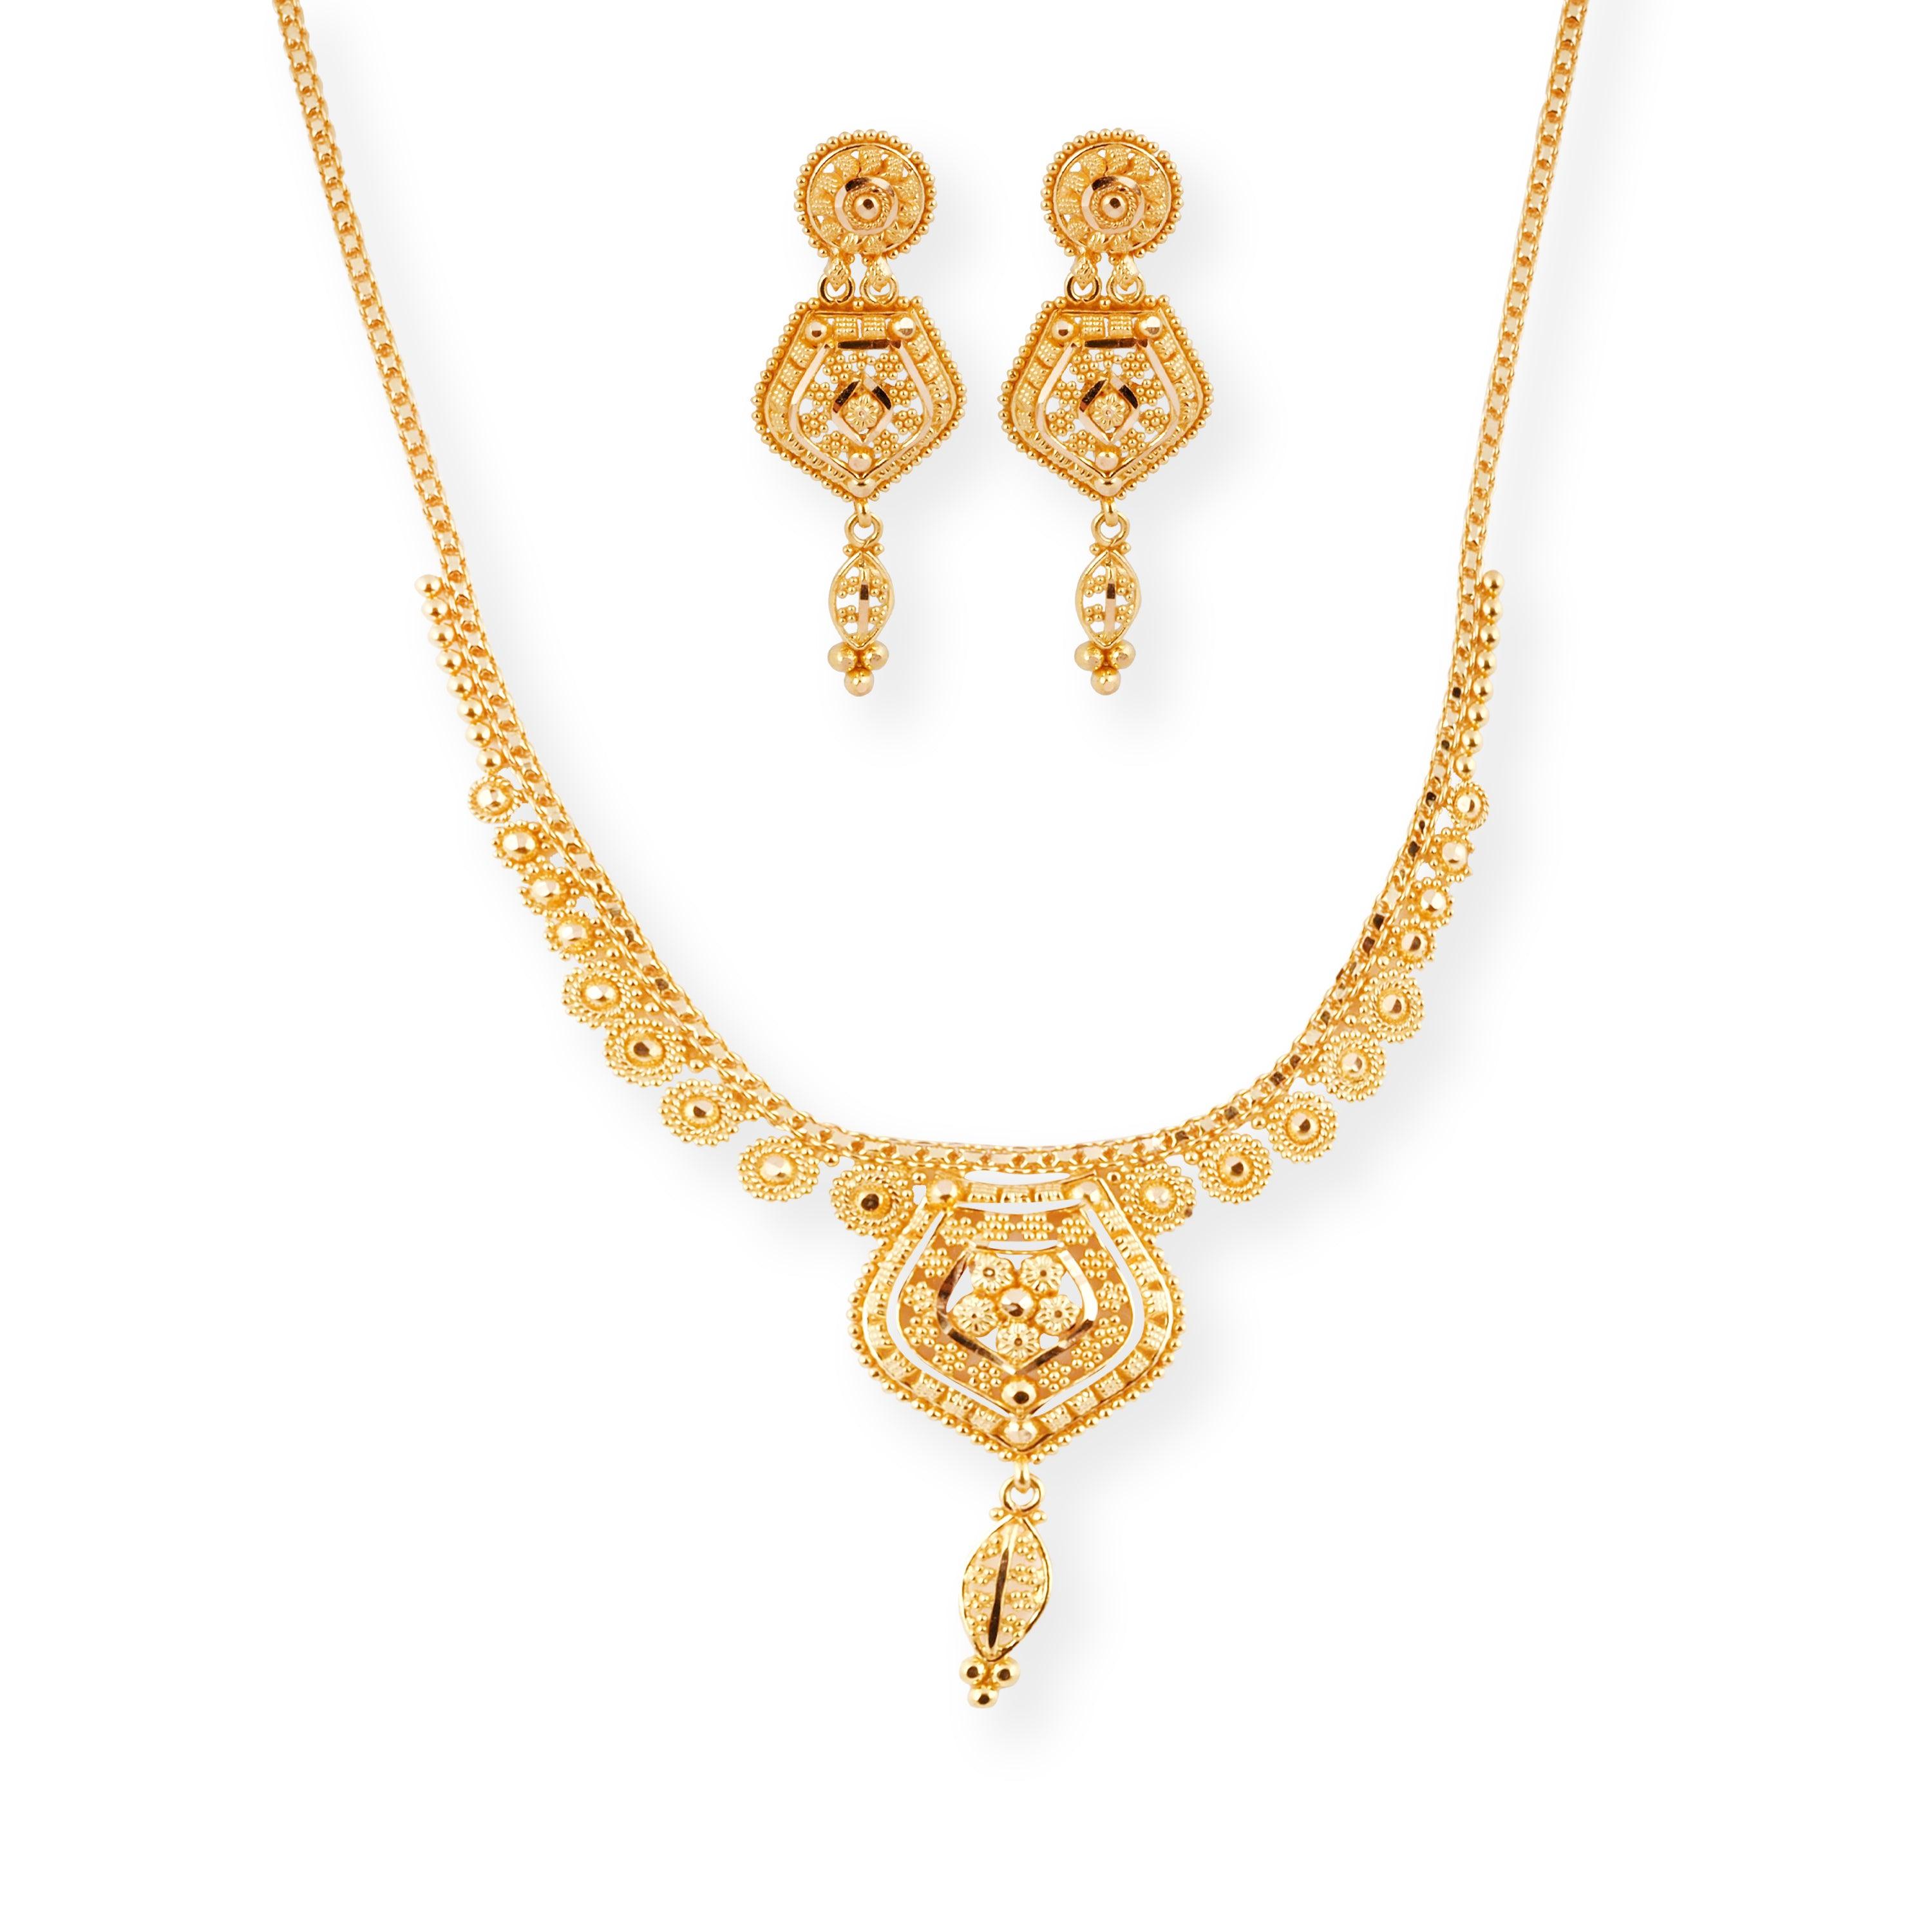 22ct Gold Filigree Design Necklace and Earrings Set - 8534 - Minar Jewellers